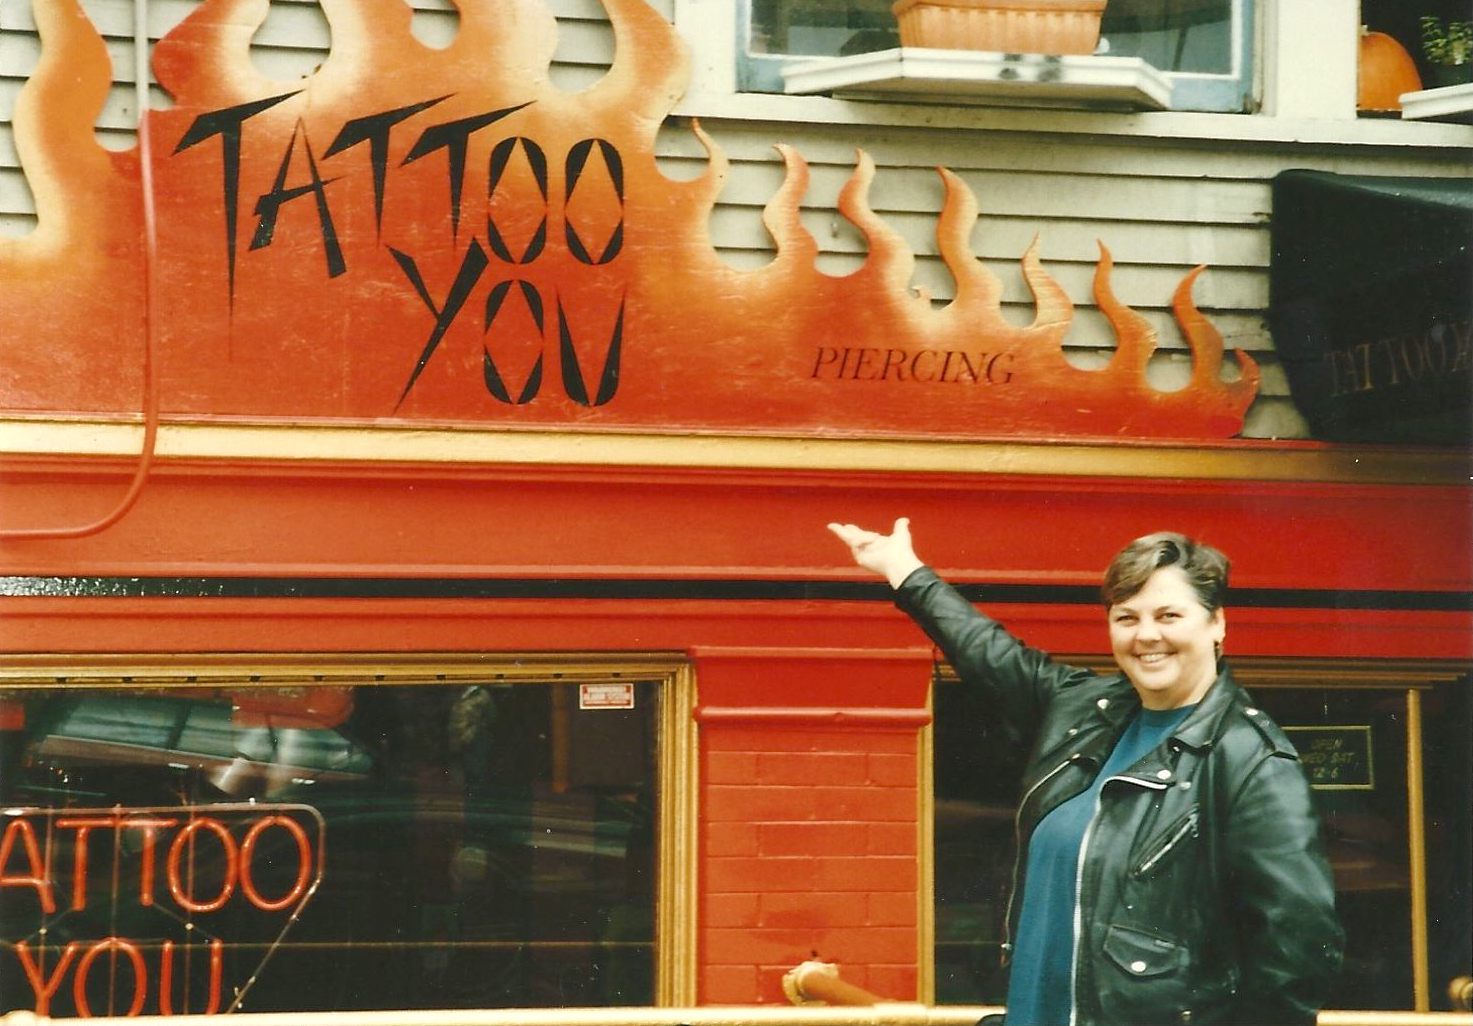 Lamar at Tattoo You, her tattoo shop in Seattle, WA. Lamar shares that her shop “saw everything including weddings and funerals.”